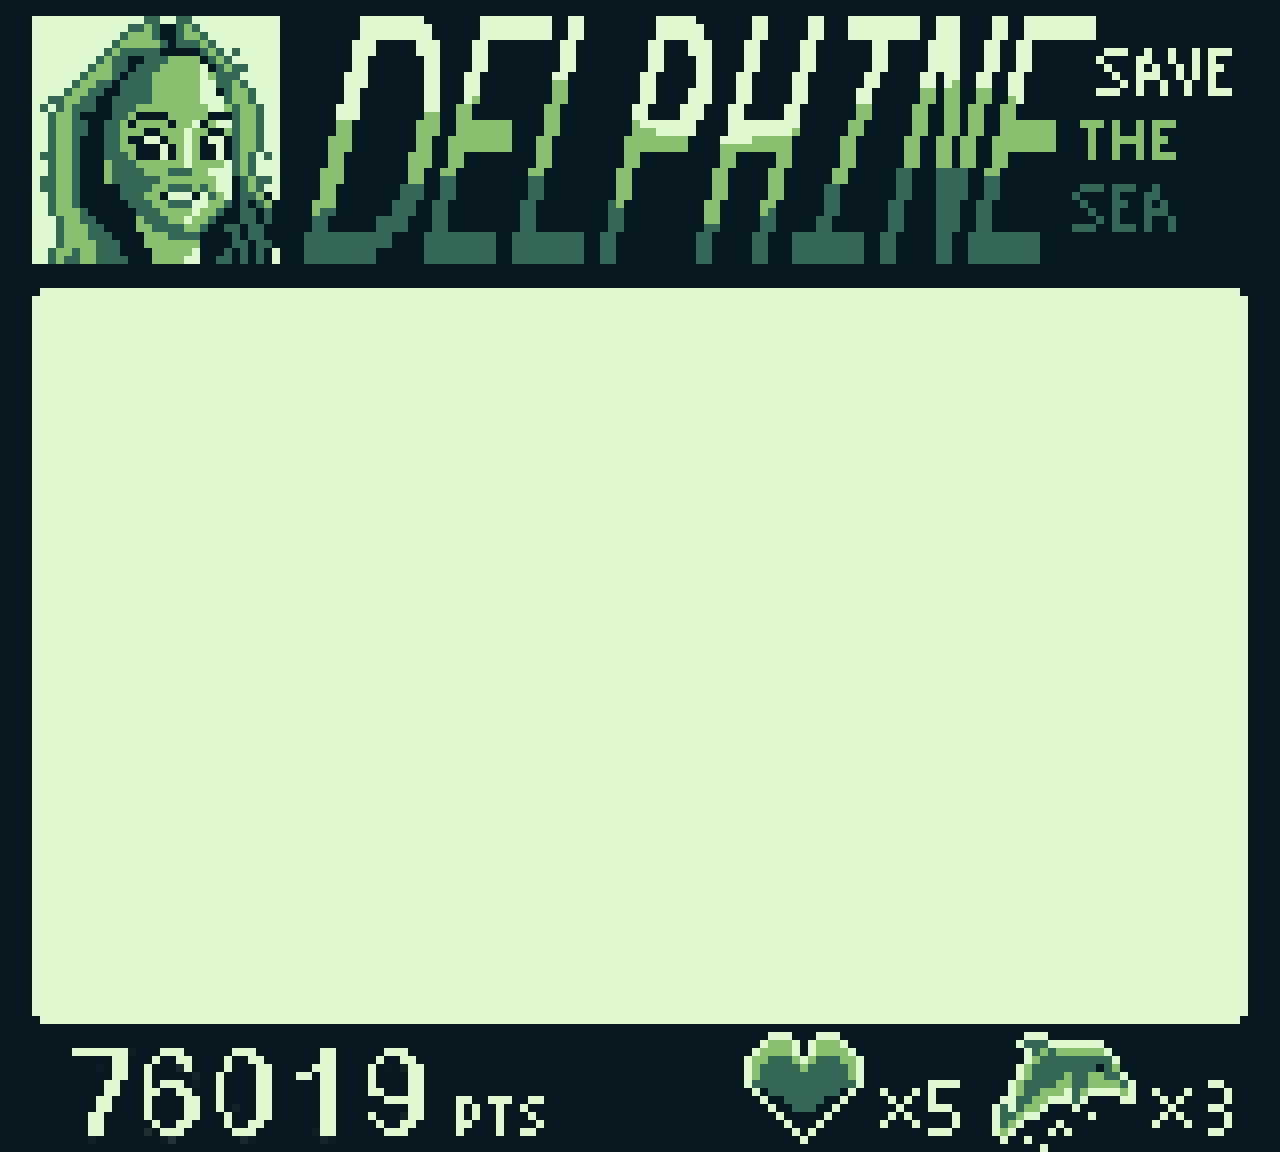 pixel art of a Game Boy game of a fictional game called Delphine